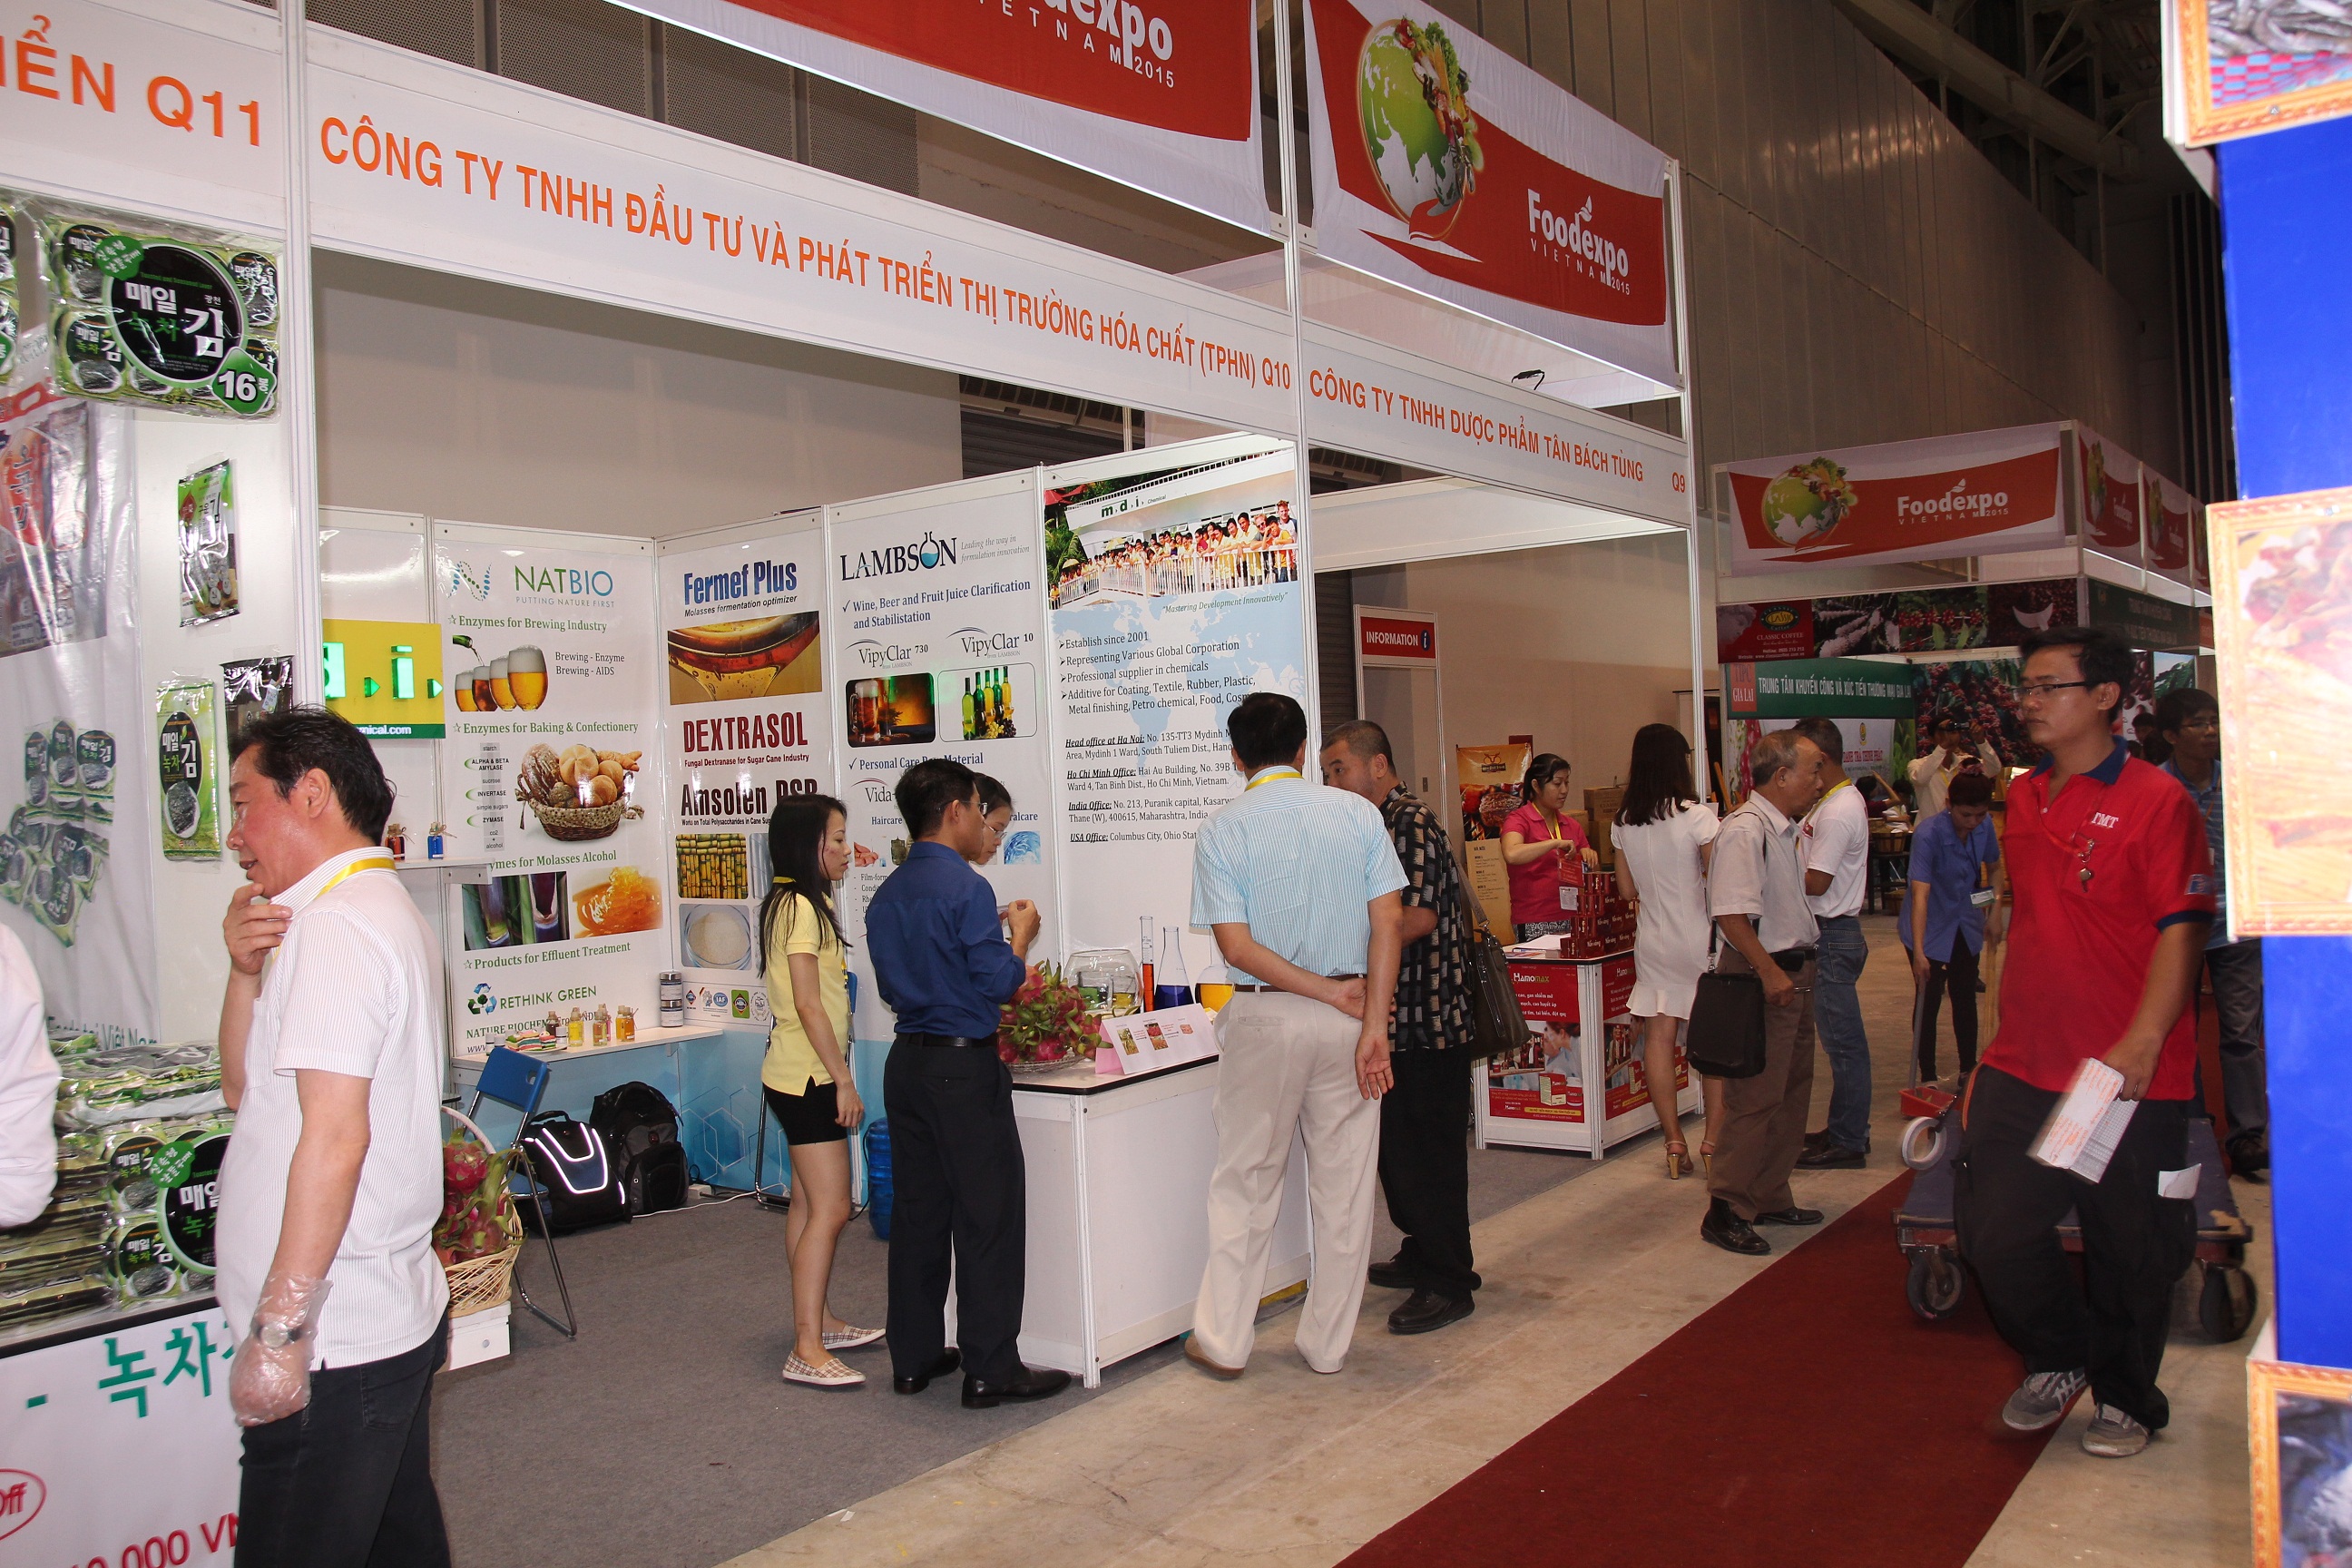 MDI joined the international food technology expo 2015 